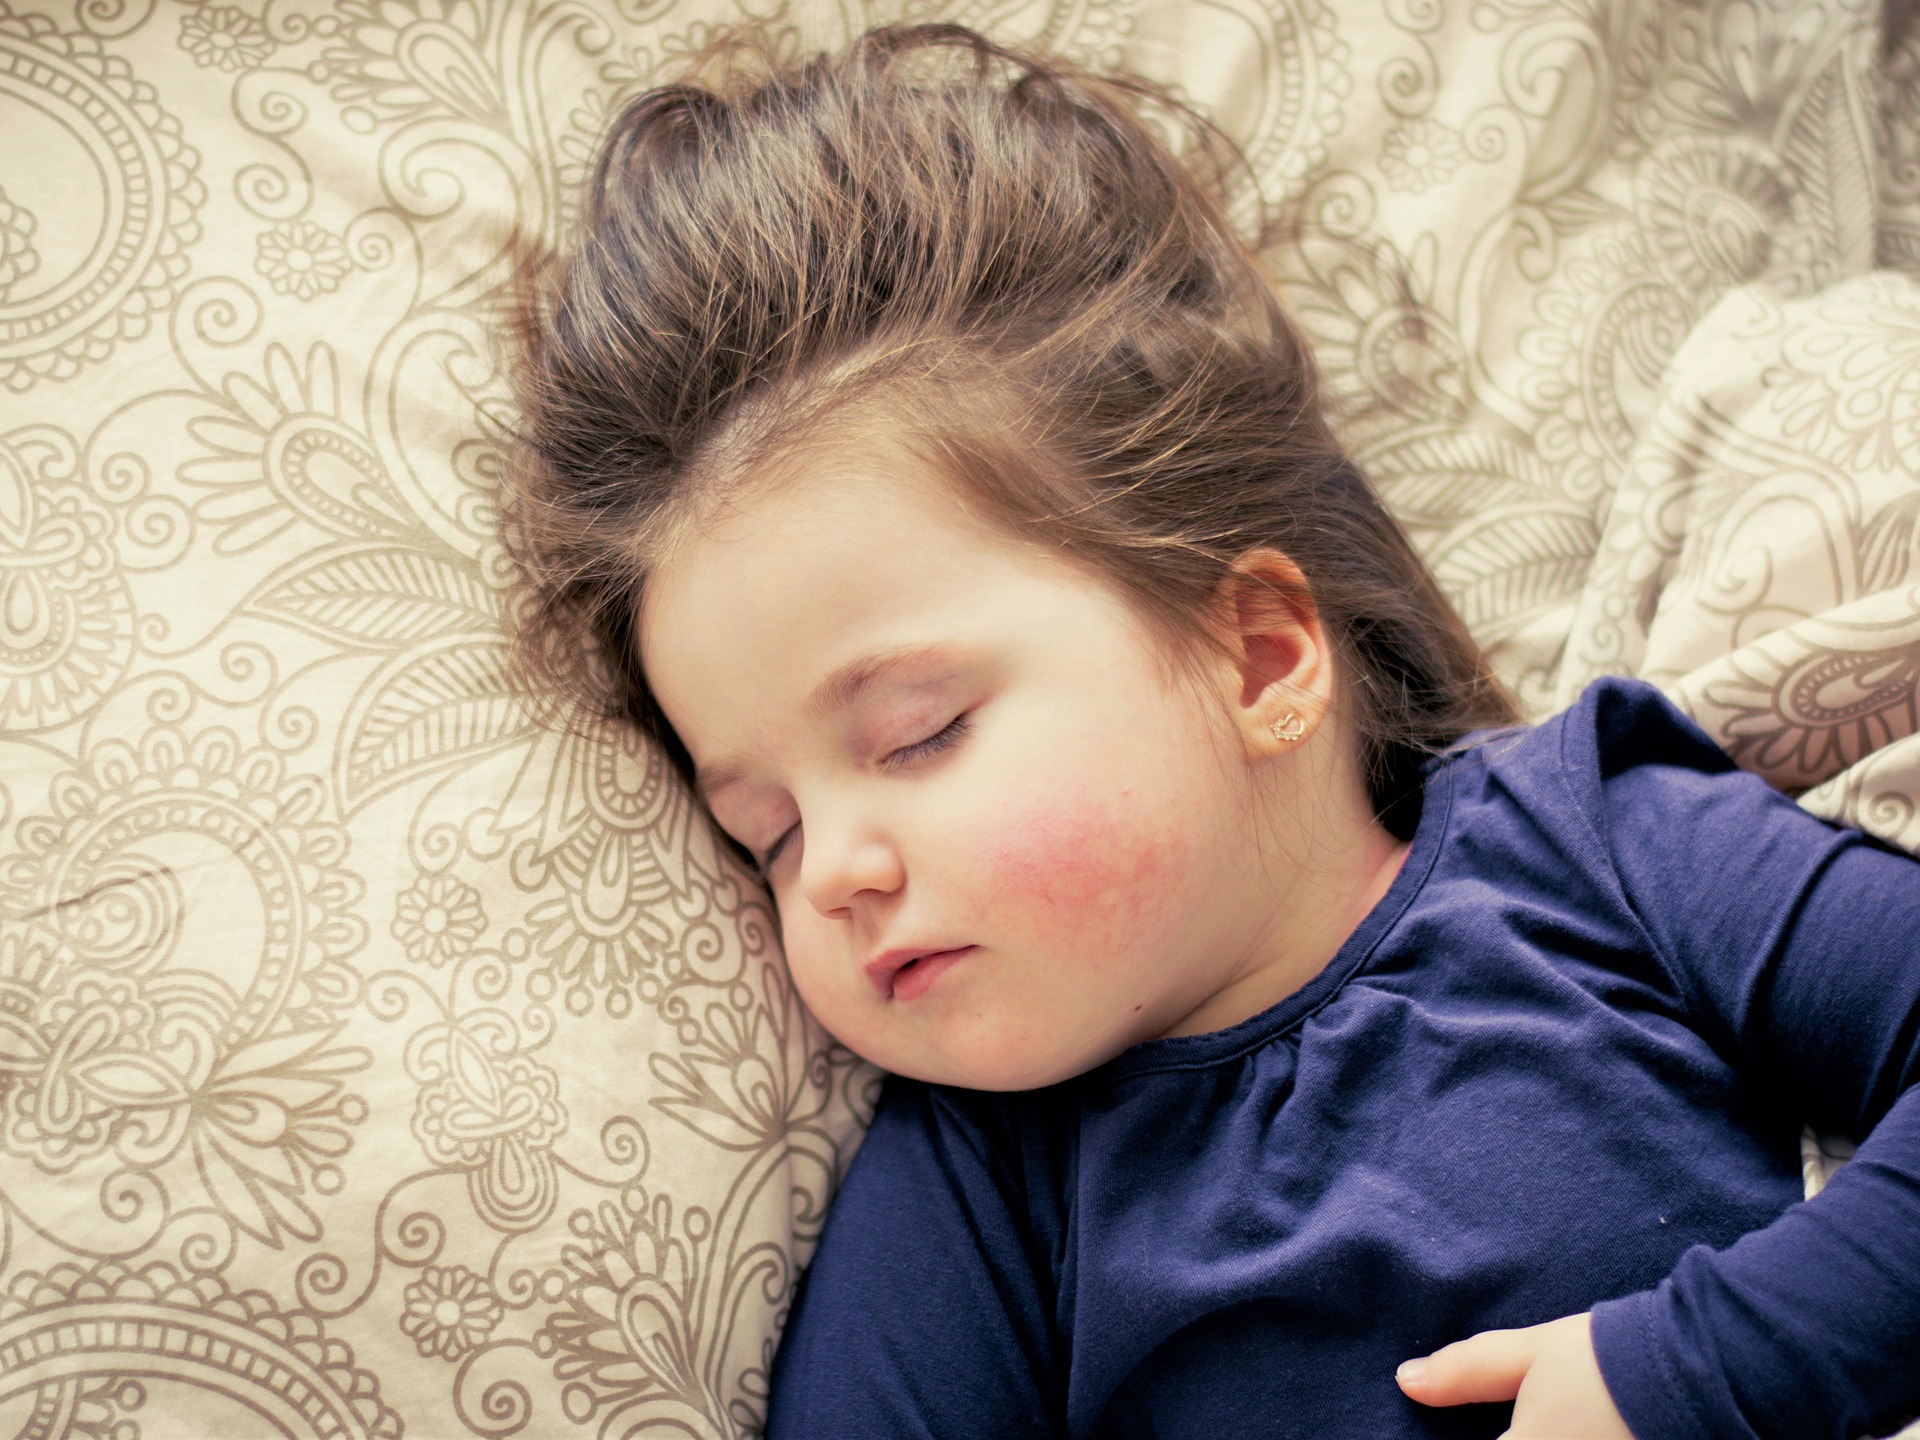 Toddler sleeping on tan pillow with paisley pattern